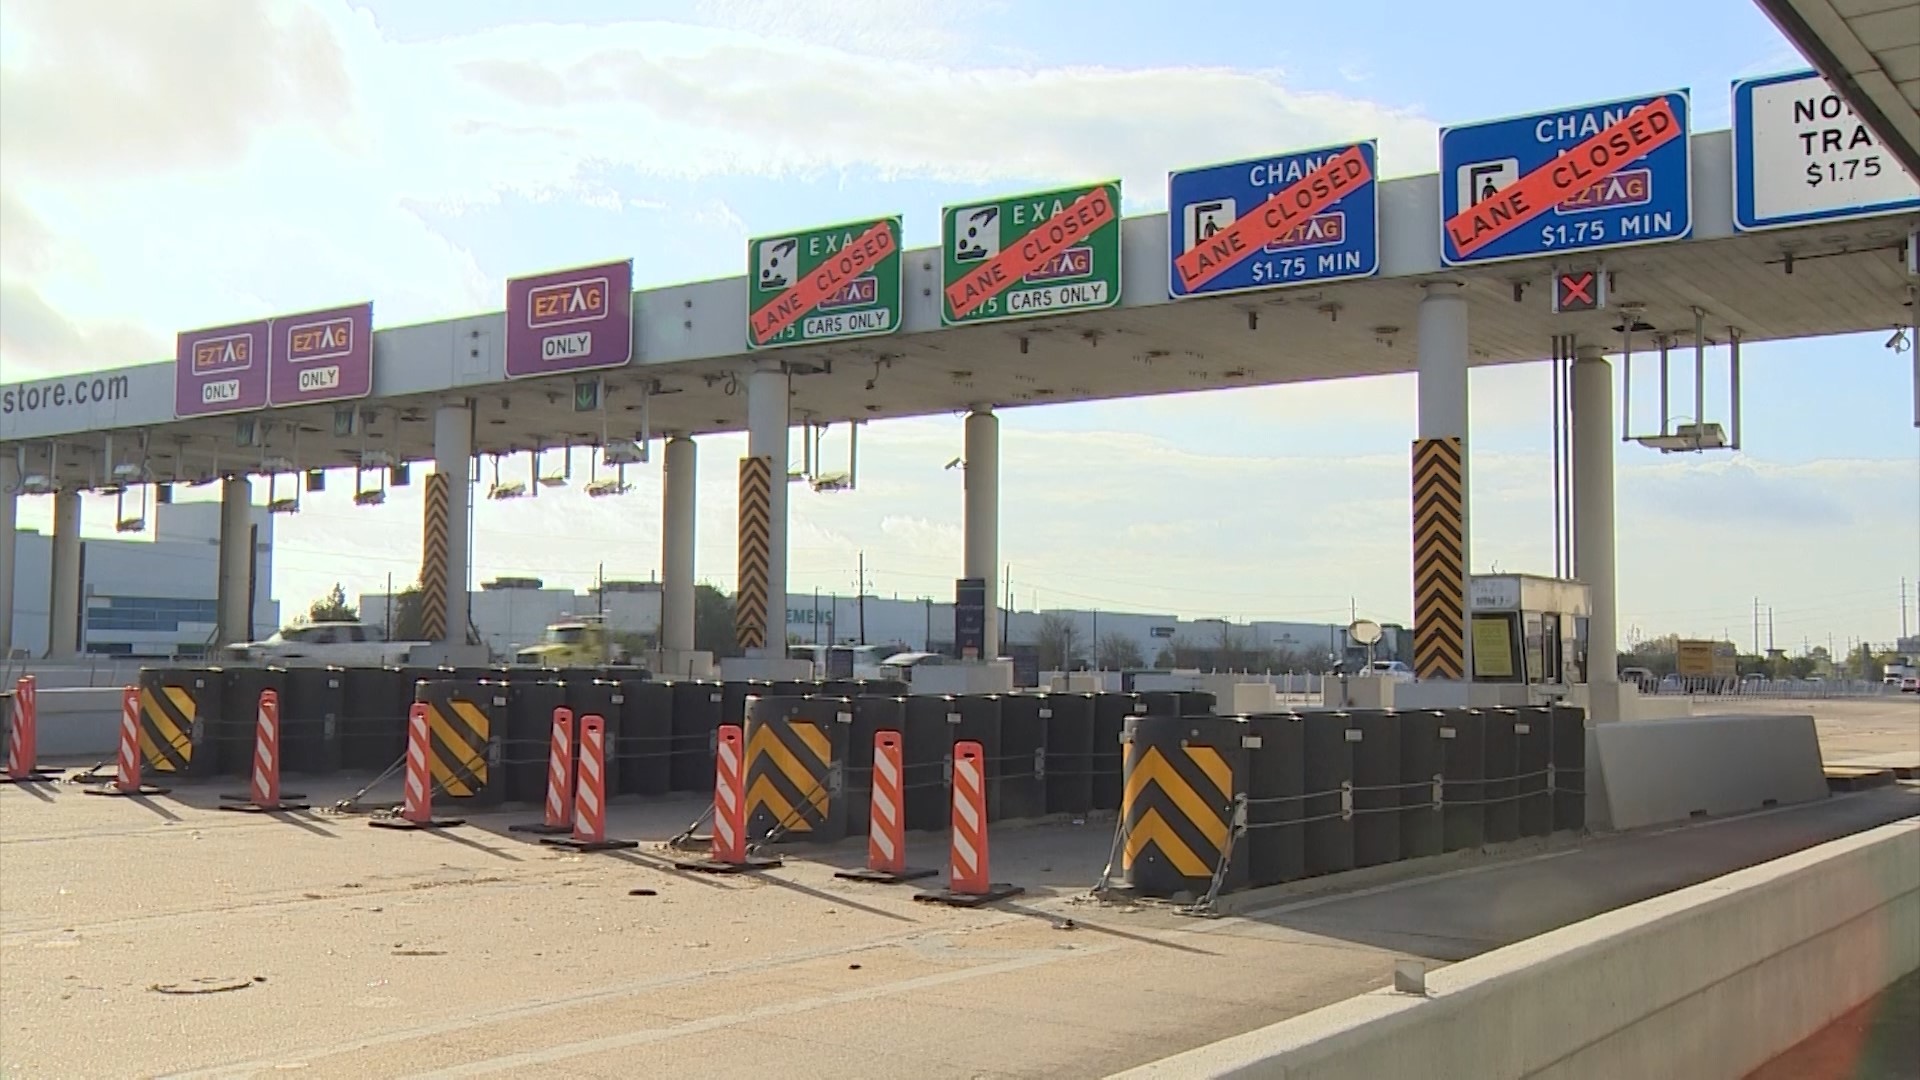 Don't expect those closed toll lanes and empty booths to open any time soon.